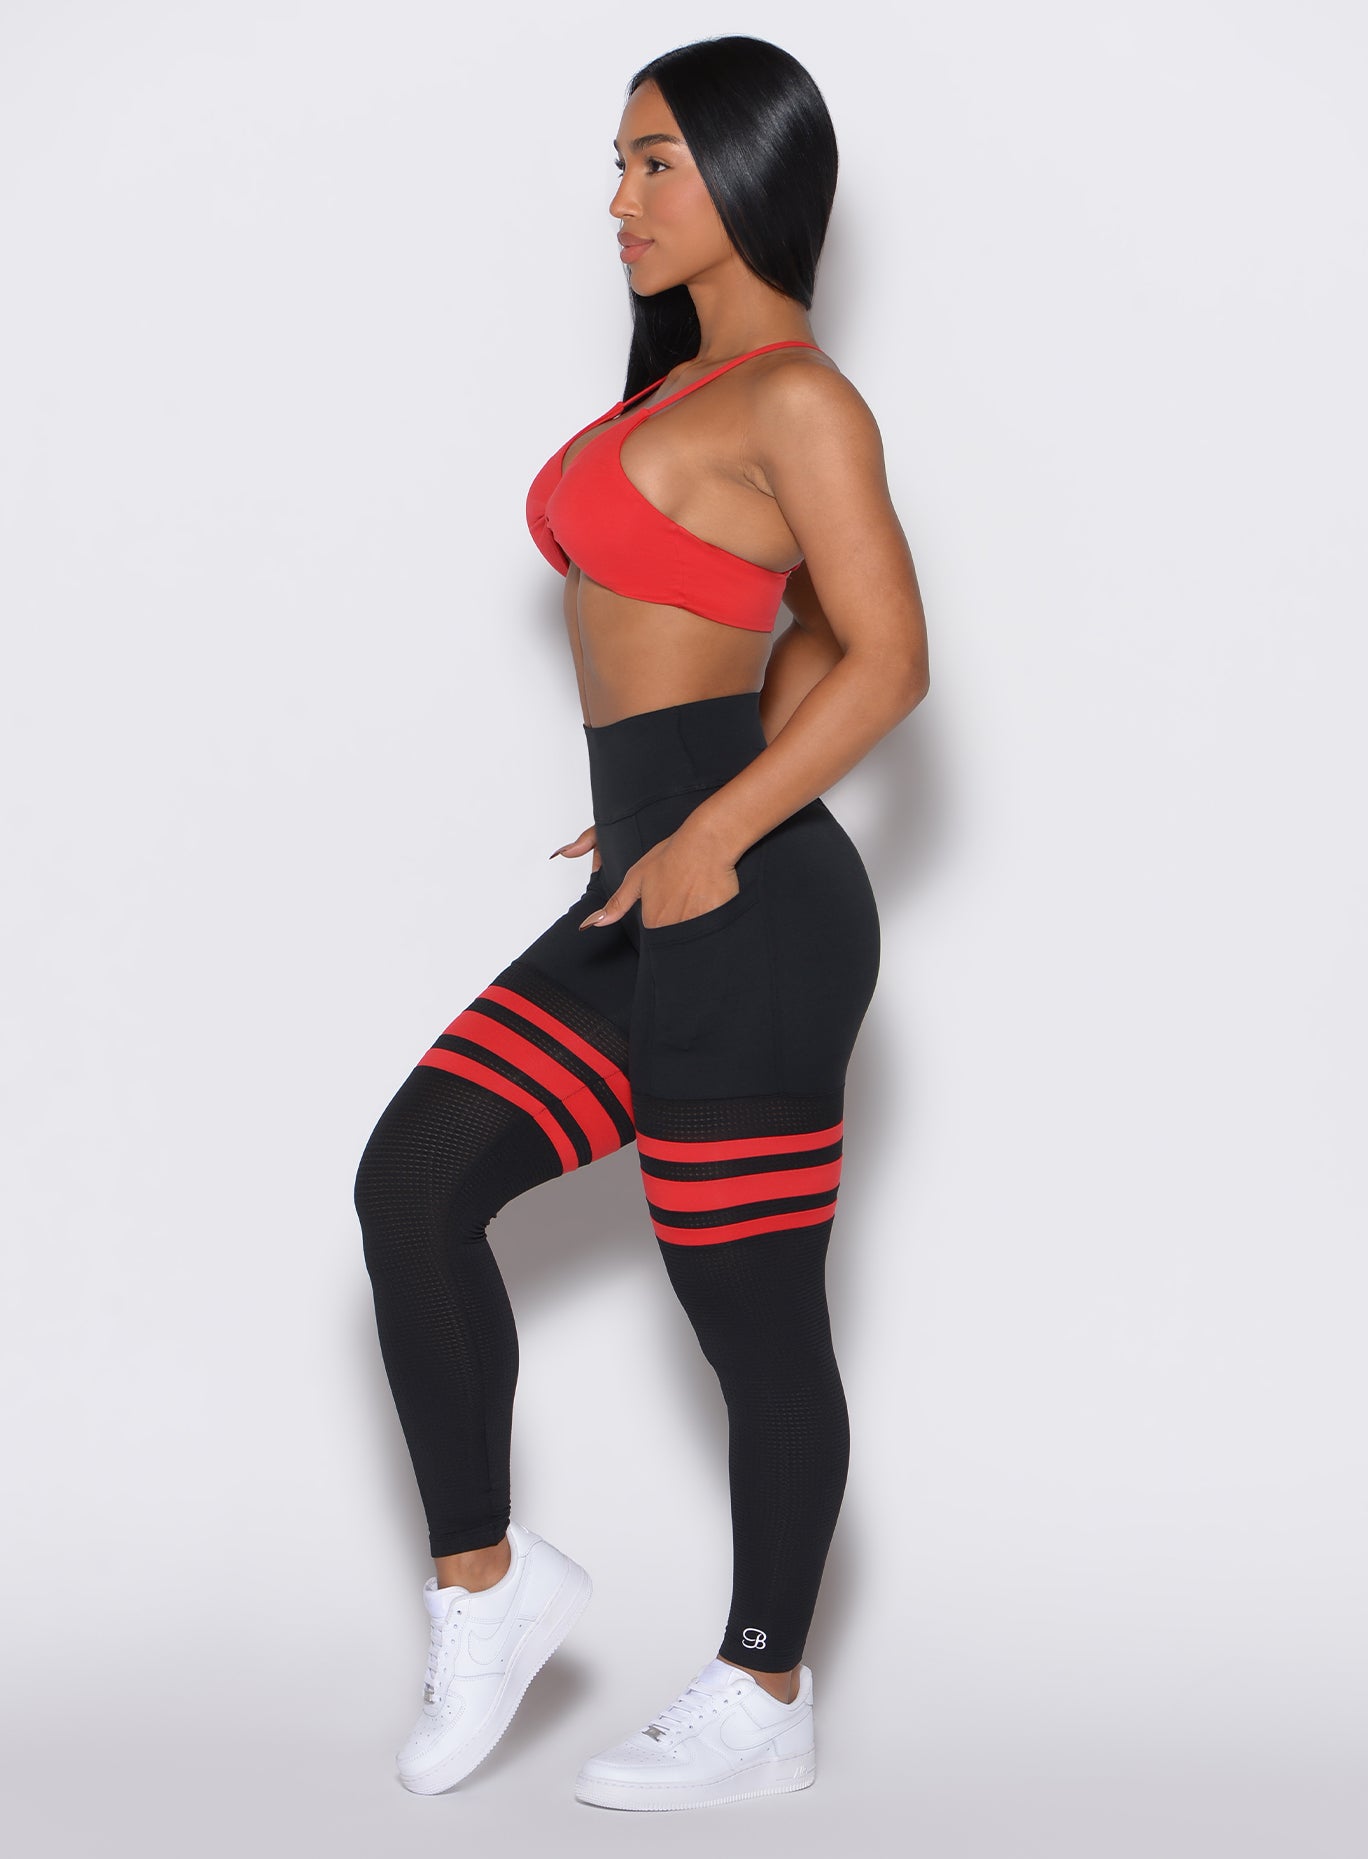 Left profile view of a model wearing the Scrunch Thigh Highs in Black Fire color along with a red sports bra  